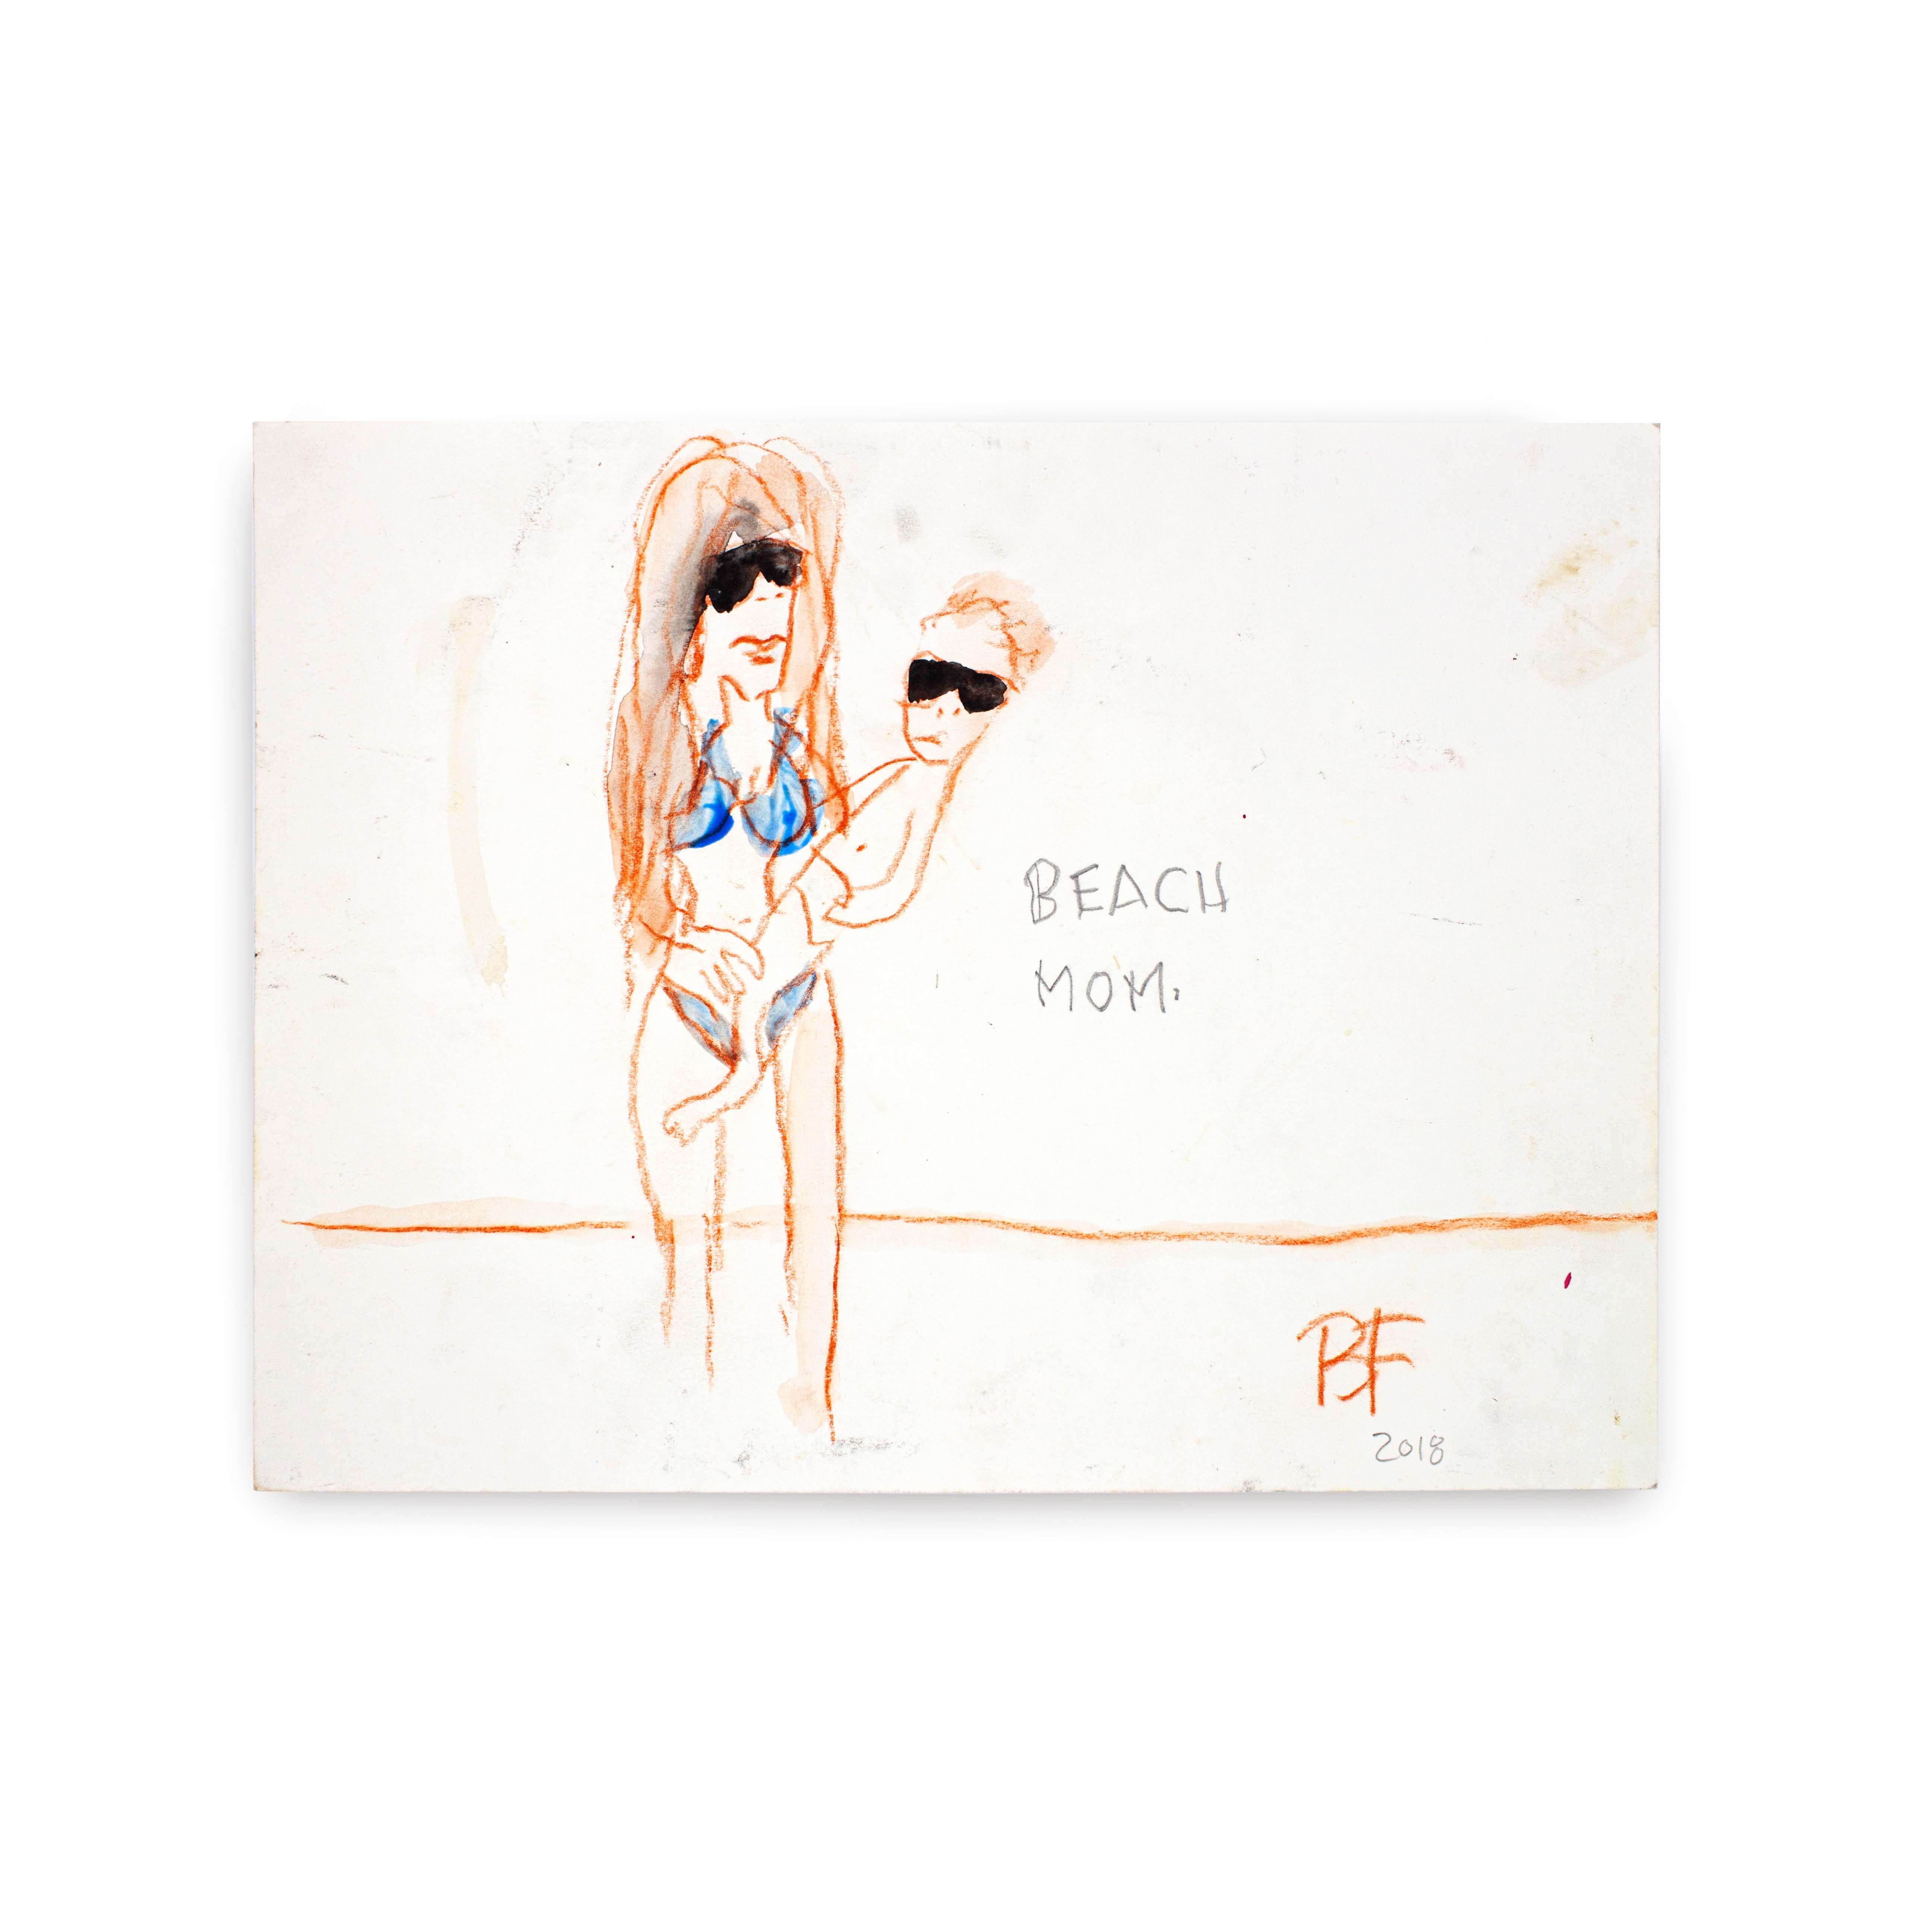 Beach Mom, 2018

Graphite, Rust Color Charcoal, and Japanese Watercolor on paper by artist Brad Fisher. Unframed.

9 × 12 in

Shipping is not included. See our shipping policies. Please contact us for shipping quotes and customization options. 
